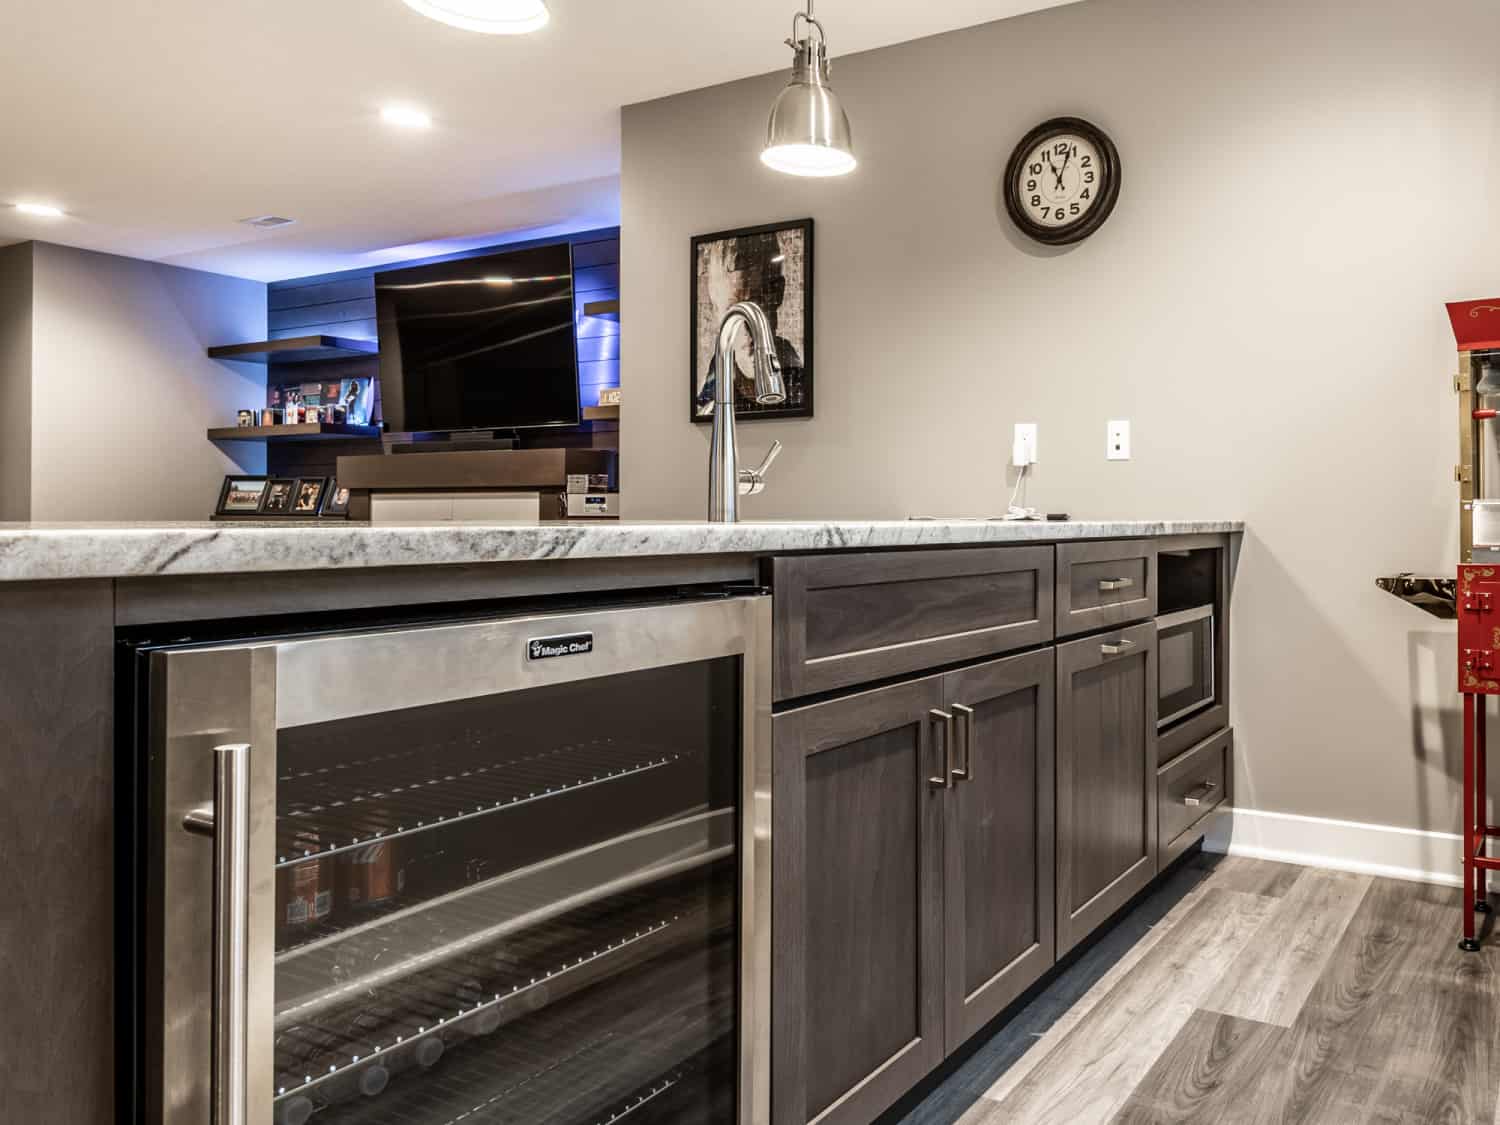 Nicholas Design Build | A kitchen with a refrigerator and a bar area.